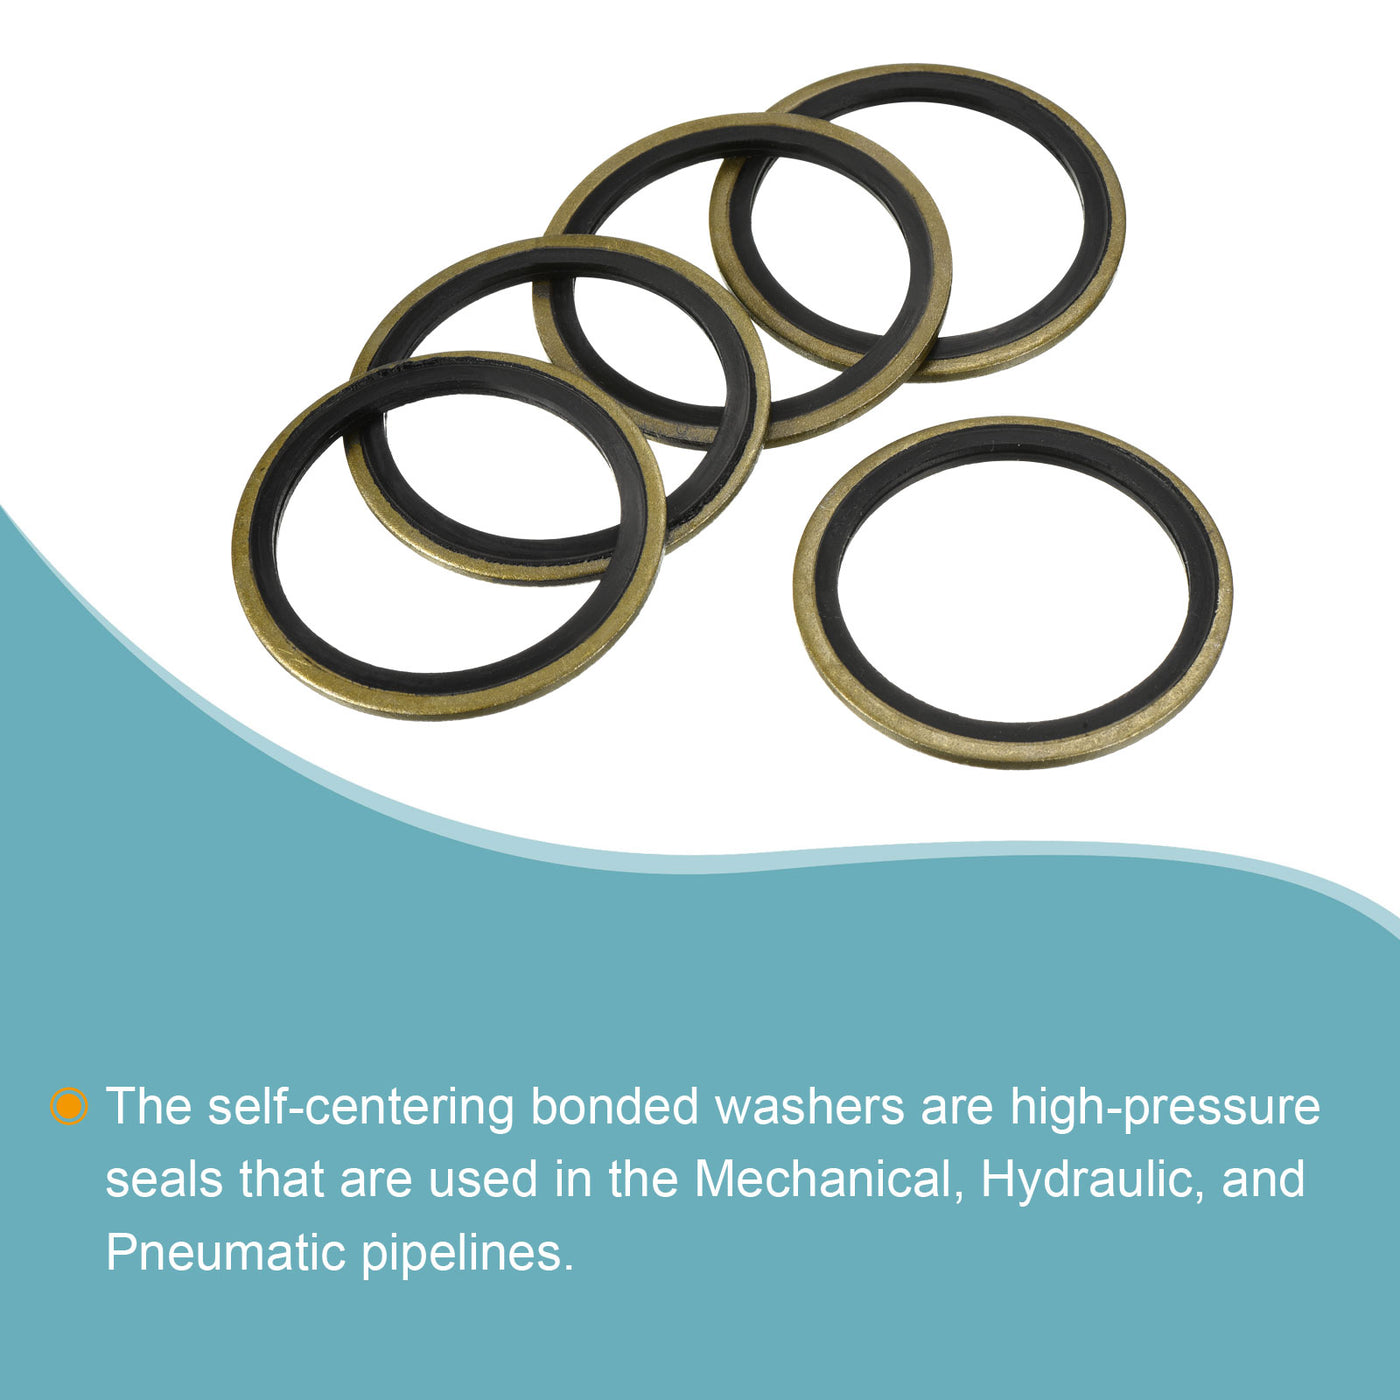 Harfington Bonded Sealing Washers M39 49.5x39x2mm Carbon Steel Nitrile Rubber Gasket, Pack of 10